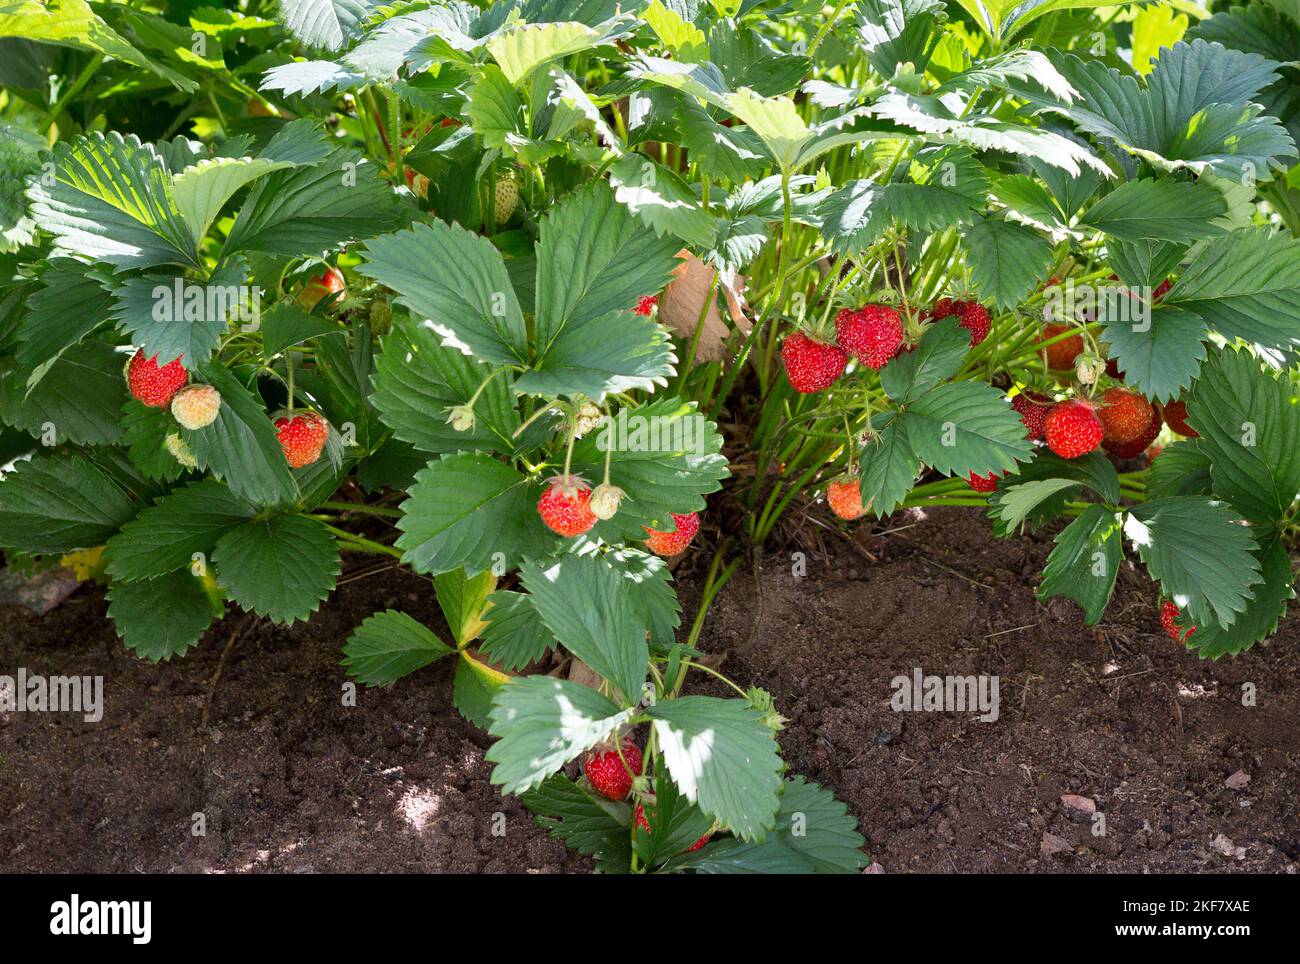 Strawberry plant. Wild stawberry bushes. Strawberries in growth at garden. Ripe berries and foliage strawberry Stock Photo